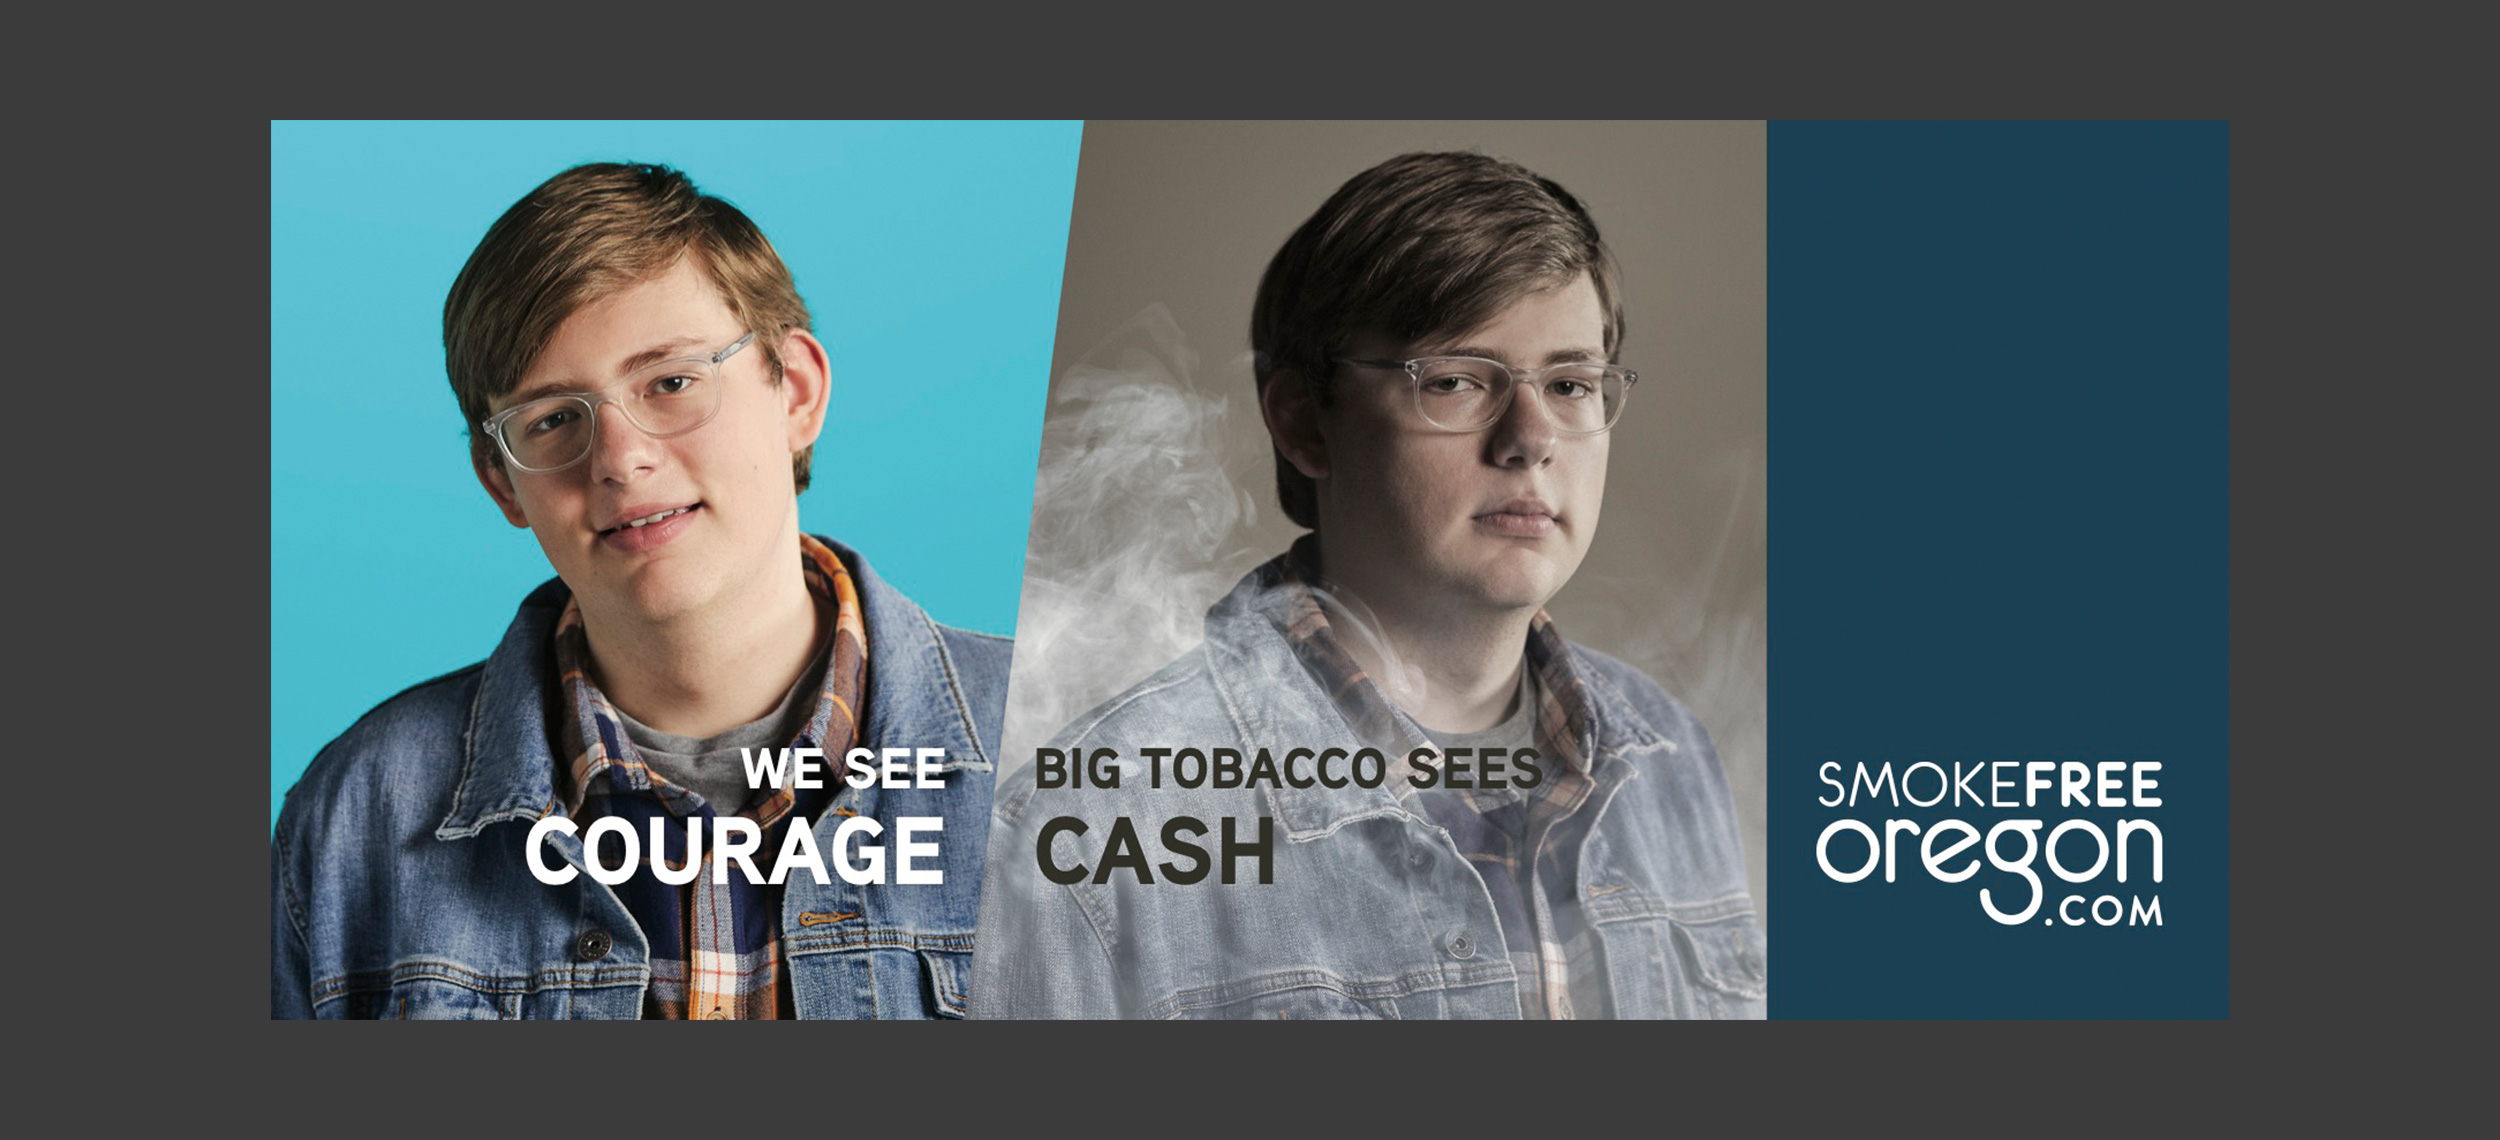 We see Courage. Big tobacco sees a customer